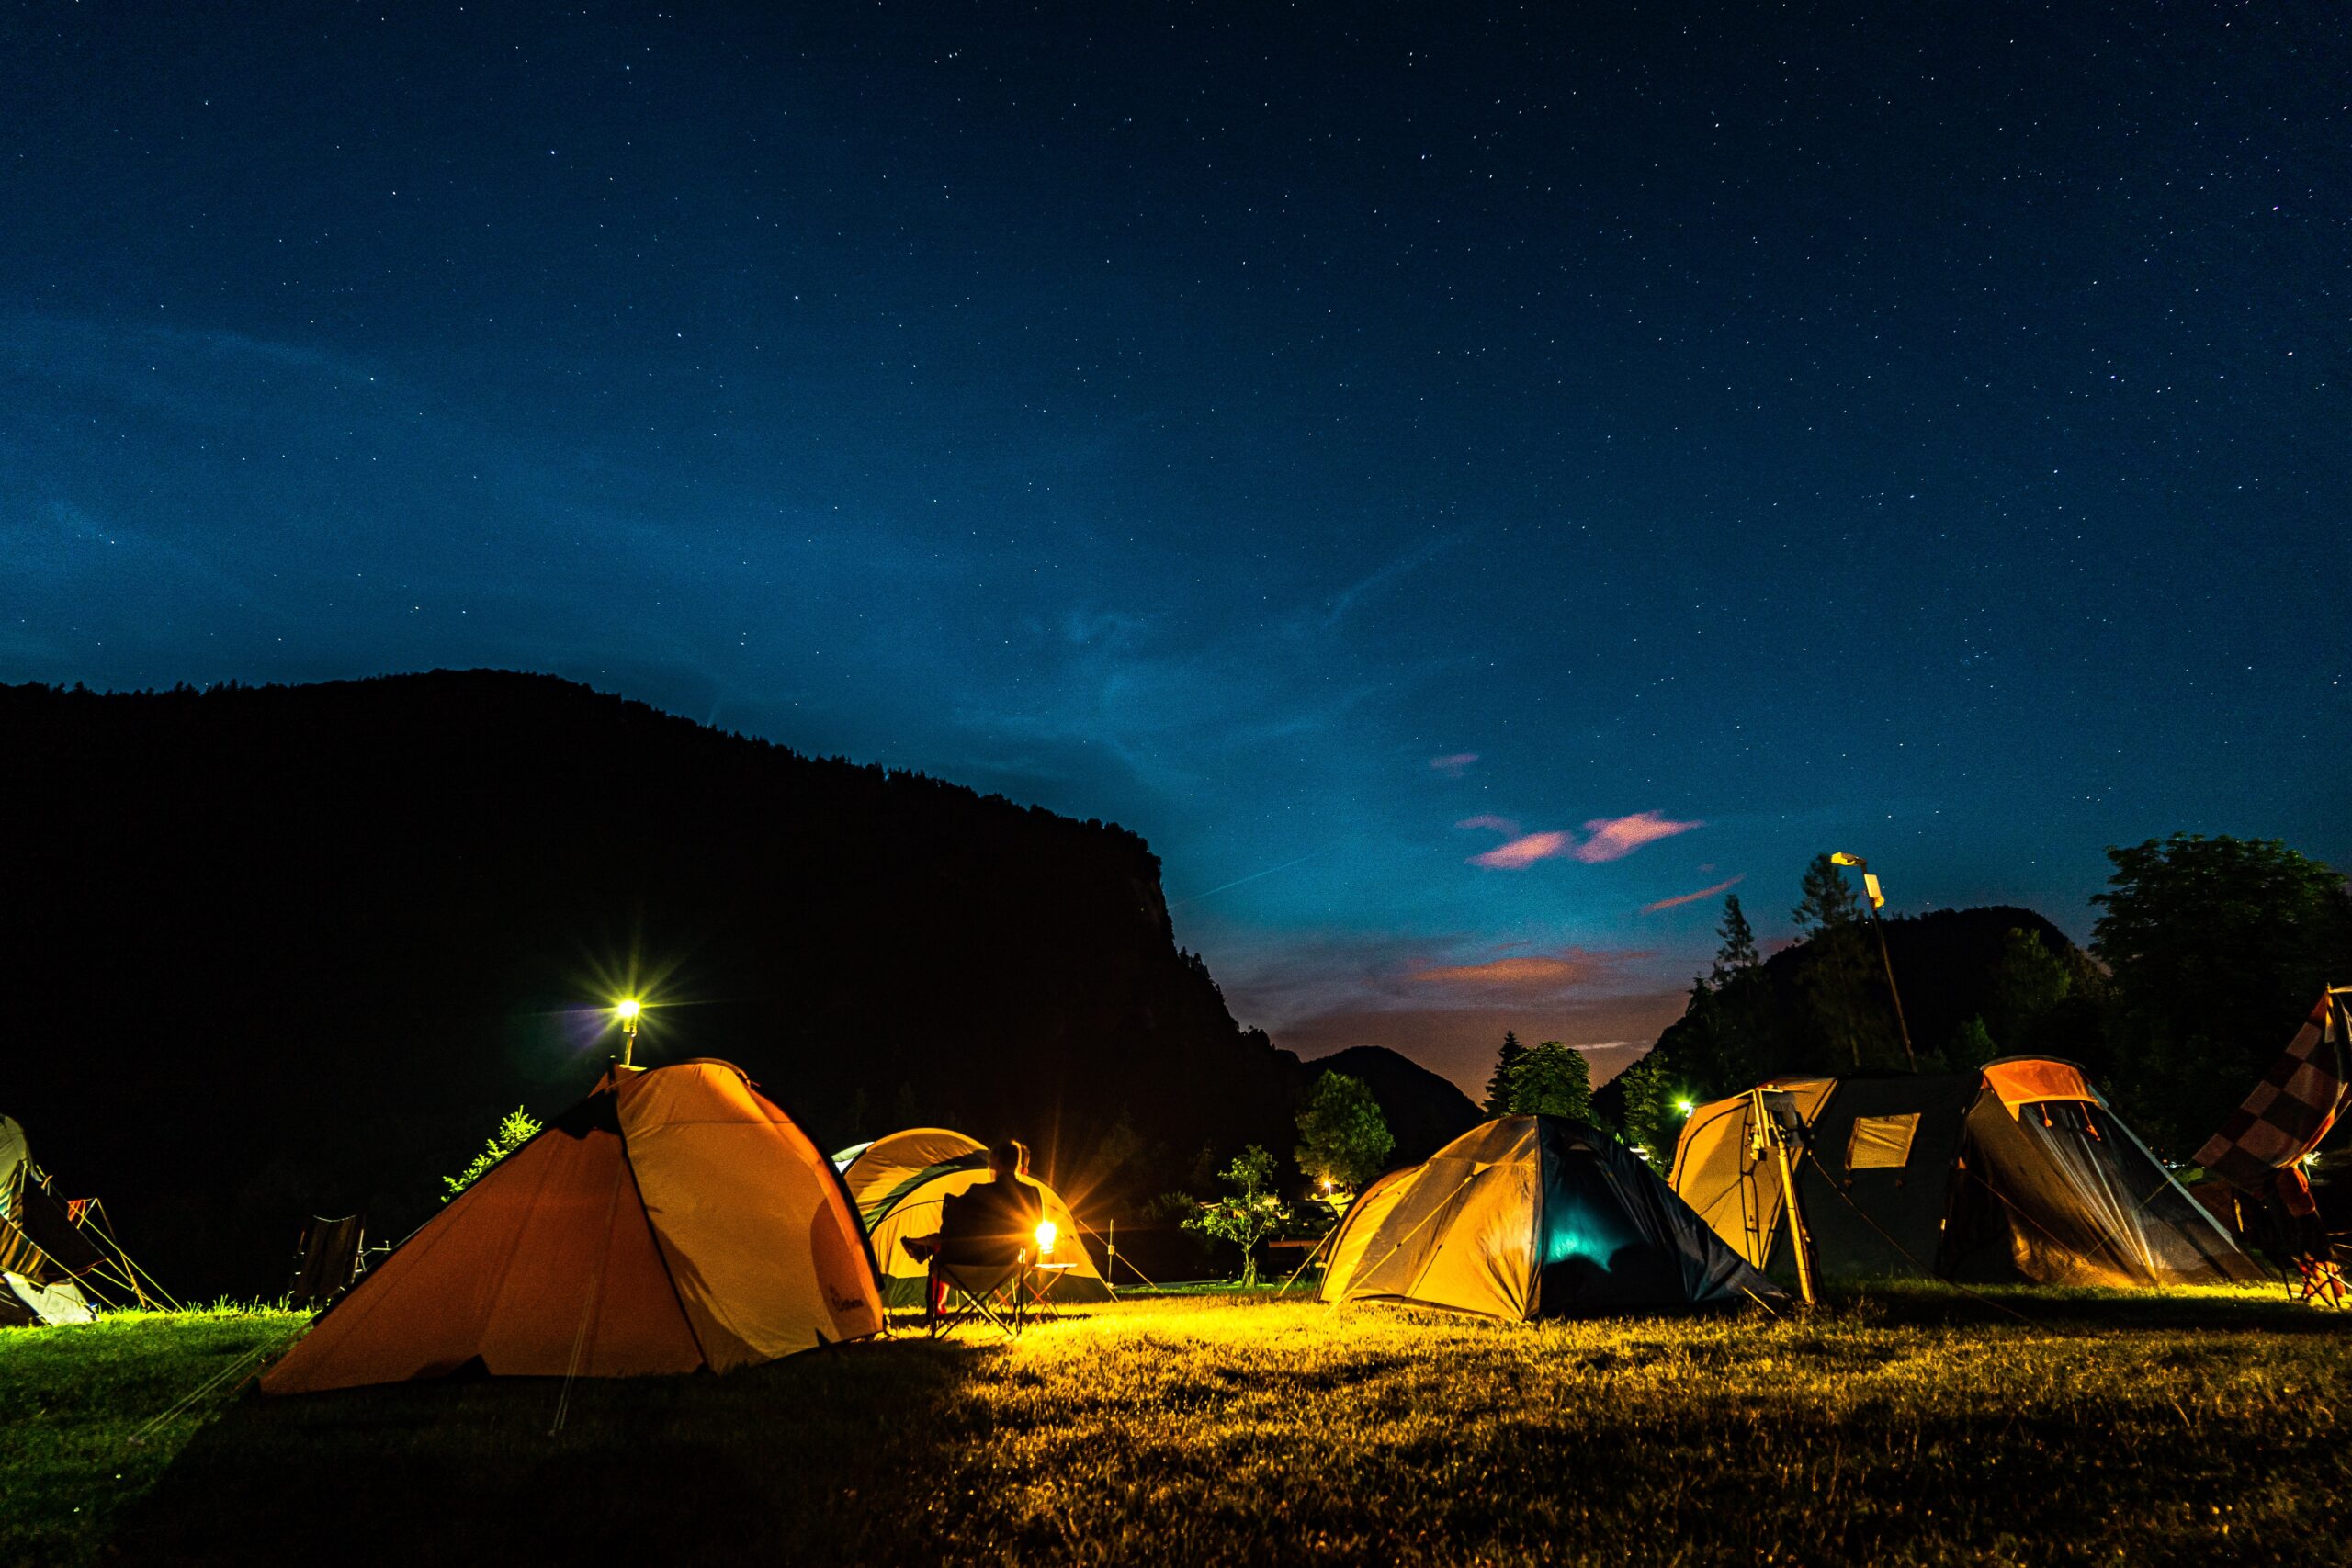 Looking for the best tents and accessories? Look no further than Tentcamping.online. Get ready to gear up and embark on unforgettable outdoor experiences.